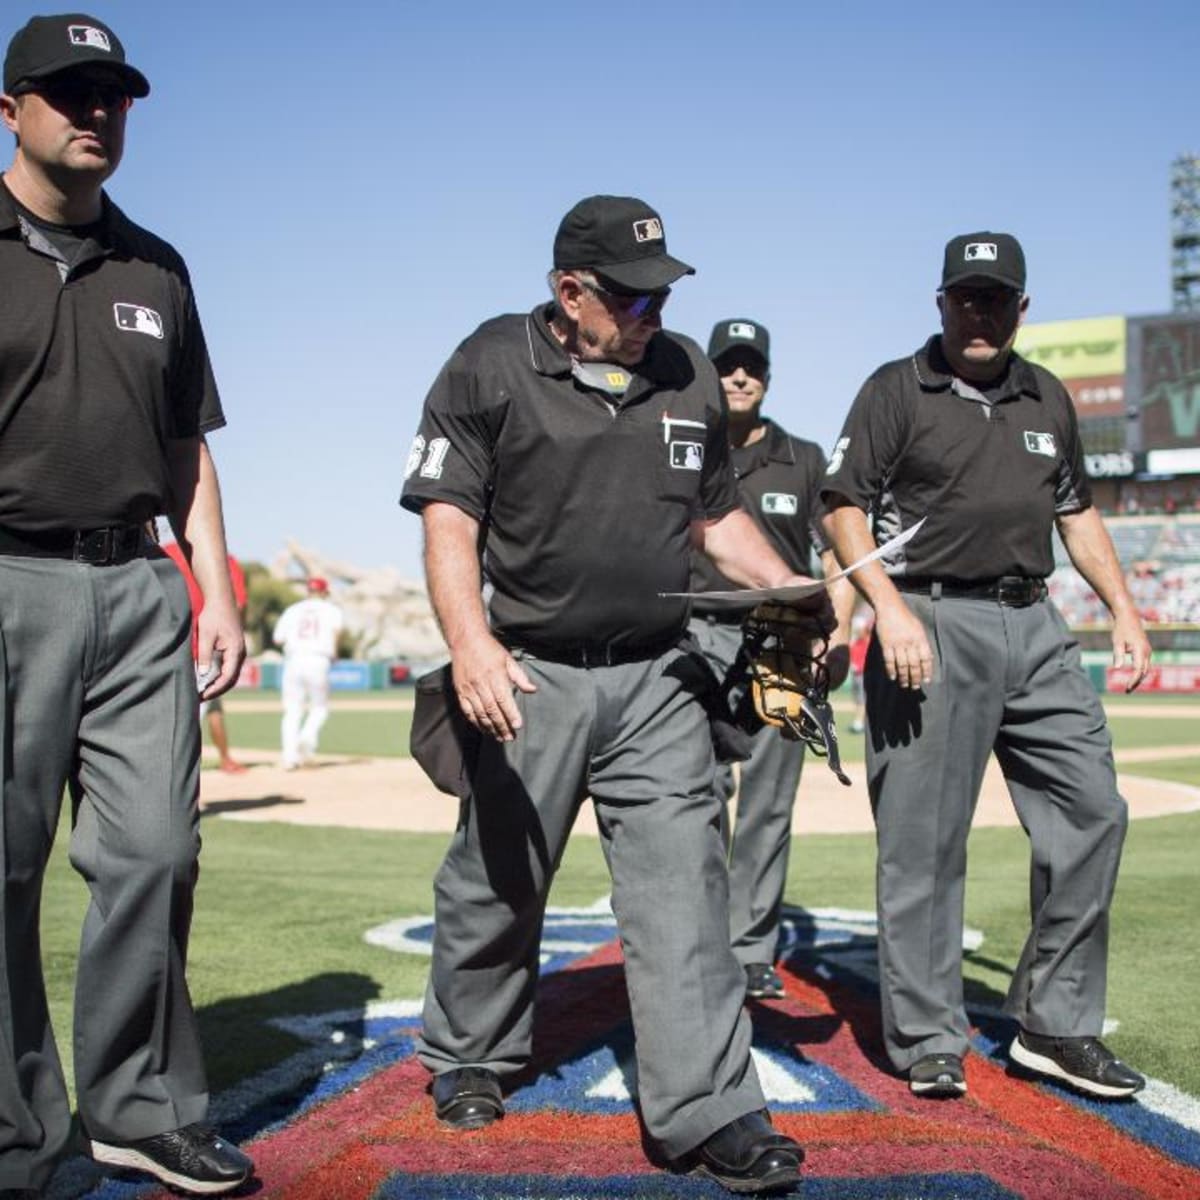 Slate  What They Teach You at Umpire School